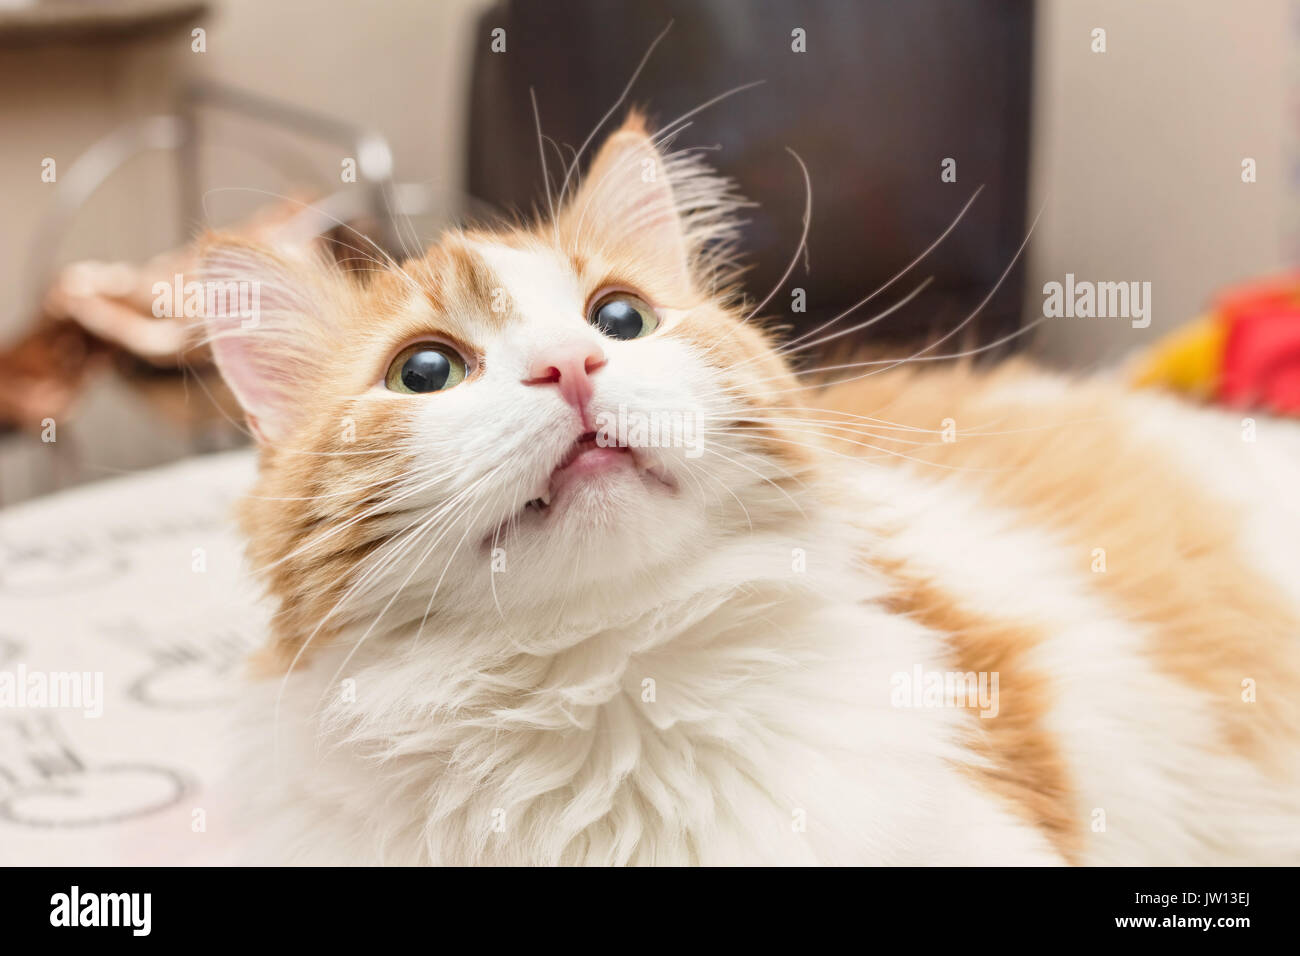 Adult pretty red dreamy cat with big eyes Stock Photo